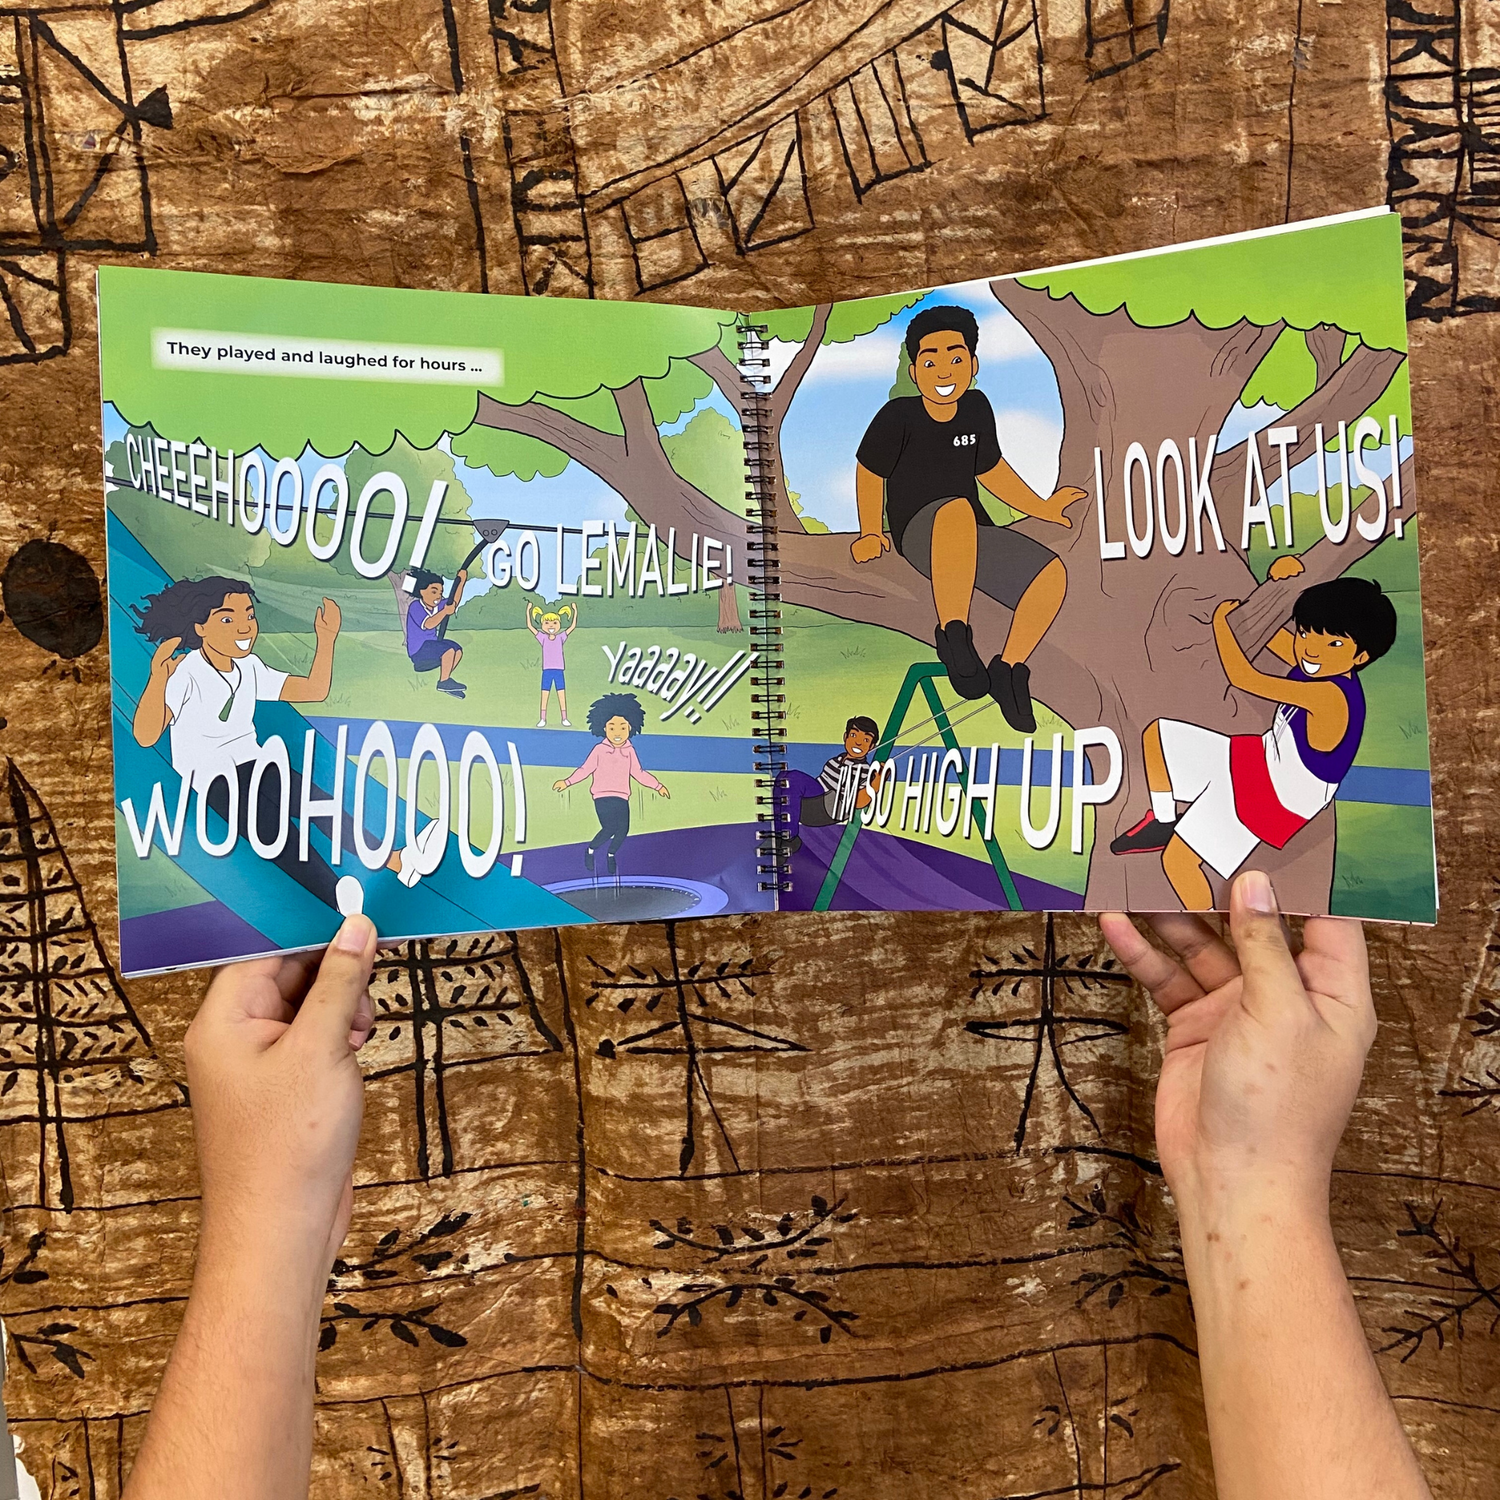 A hand model holding a bilingual Samoan children's book titled "Lemalie and Sakalia’s School Holiday". The book is an illustration of two young boys riding their bikes during their school holiday.